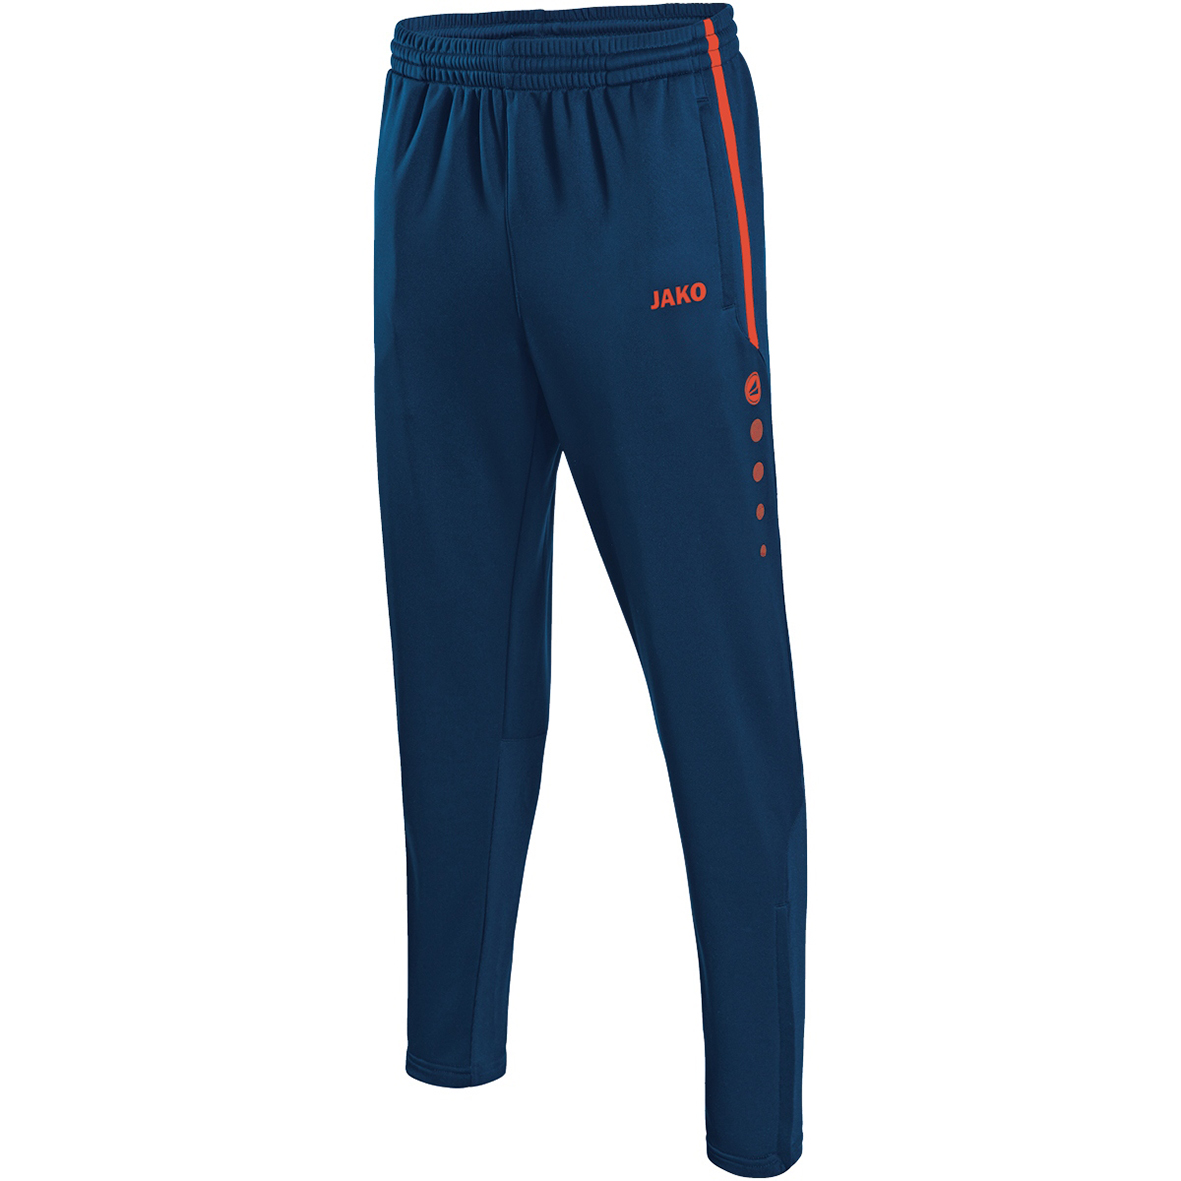 JAKO TRAINING TROUSERS ACTIVE NAVY-FLAME MEN.